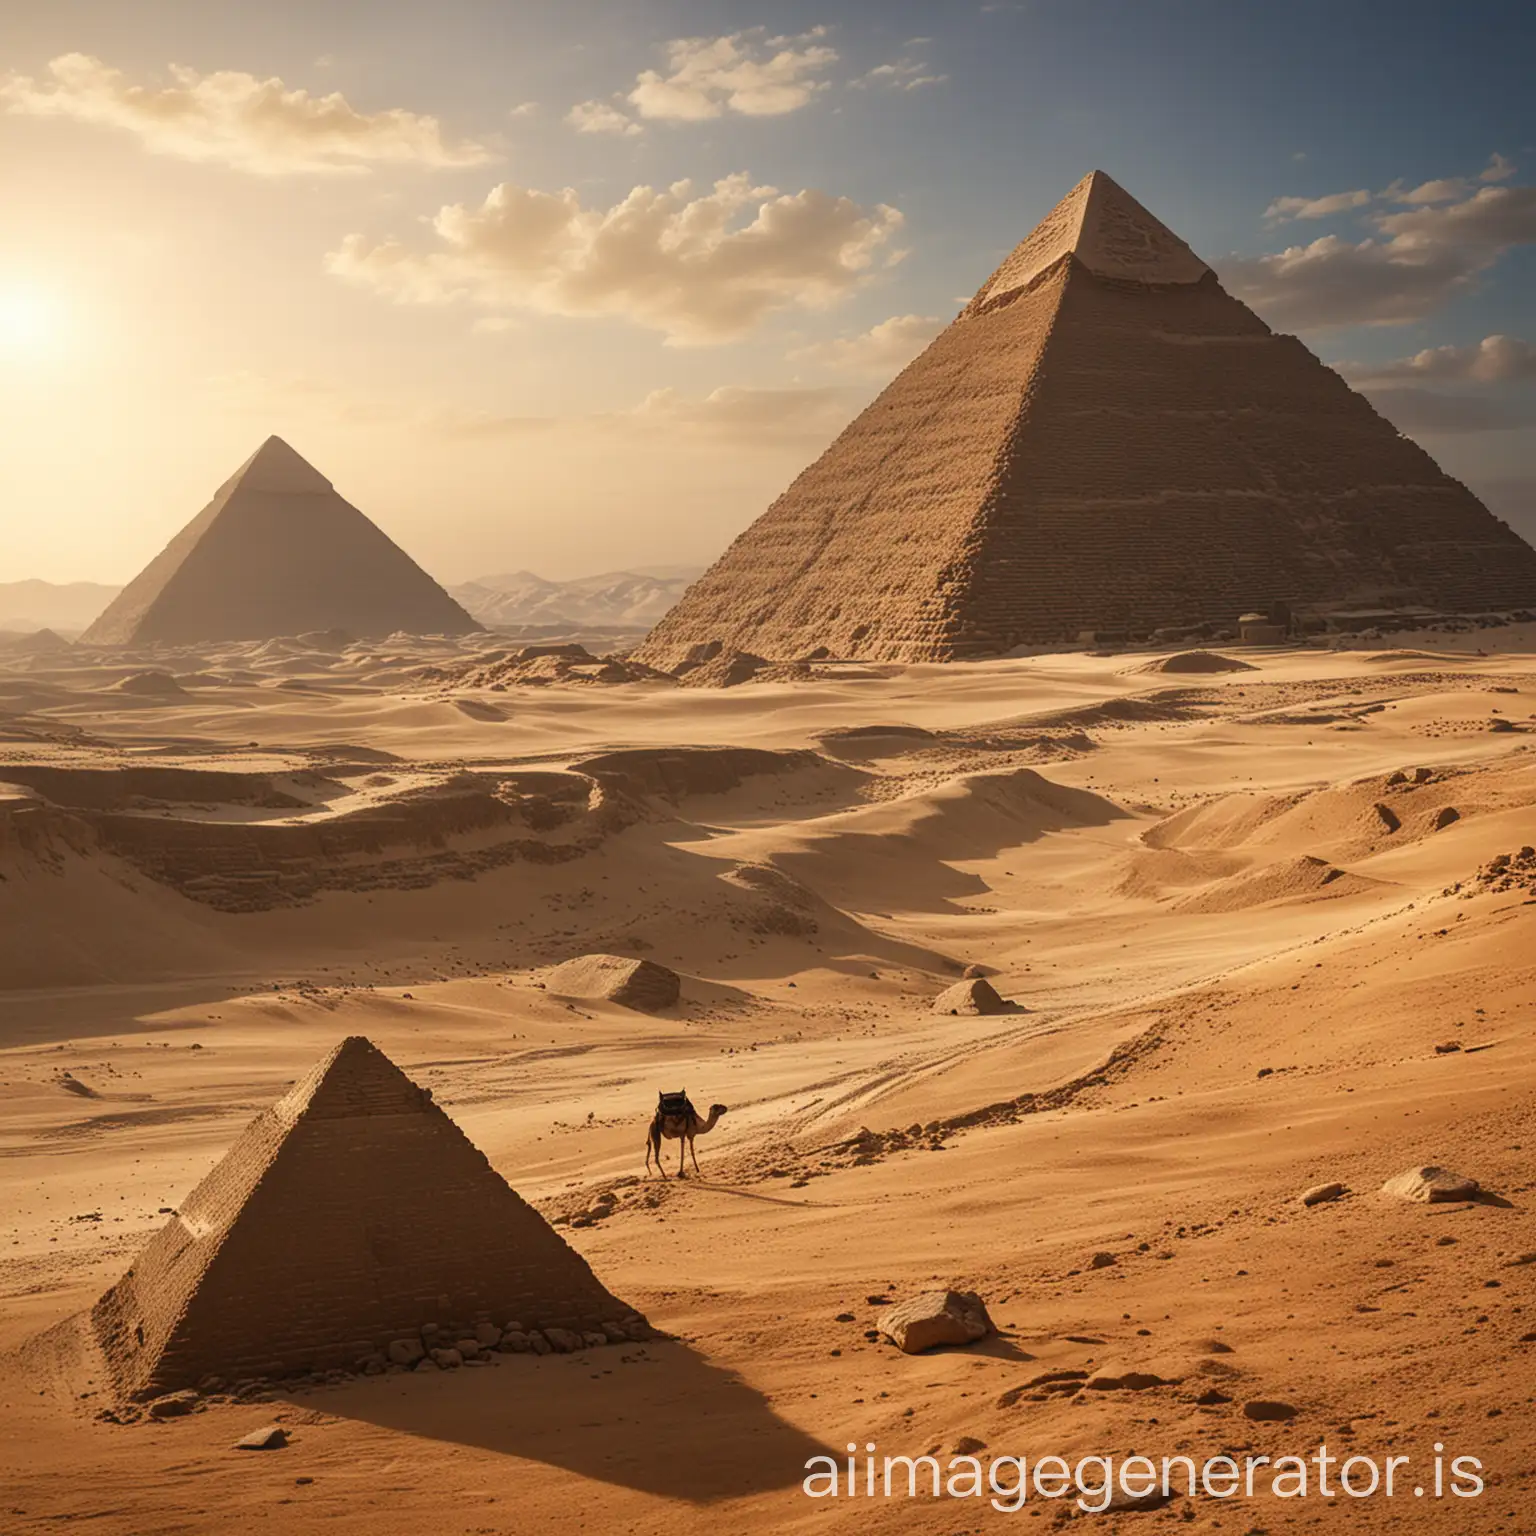 Create a breathtaking image of ancient pyramids set against a desert landscape. The scene should evoke a sense of wonder and historical grandeur. Include the following elements to enhance the composition:

Pyramids: The primary focus should be on the iconic pyramids, capturing their imposing size and timeless architectural precision. Include a combination of well-known pyramids, such as the Great Pyramid of Giza, with accurate details.
Desert: Surround the pyramids with a vast, arid desert, characterized by rolling dunes and a golden, sandy expanse. The texture and patterns of the sand should be clearly visible.
Sky: Feature a clear, deep blue sky with minimal clouds, or consider a dramatic sunset or sunrise with warm, vibrant hues to add depth and contrast to the scene.
Foreground: Incorporate elements such as scattered stones, ancient artifacts, or a lone camel to add context and interest to the foreground.
Lighting: Use natural lighting to create strong contrasts and shadows, highlighting the contours and details of the pyramids and the desert landscape.
Atmosphere: Convey a sense of historical significance and mystery. Consider adding subtle elements like distant mirages or a slight haze to enhance the ancient, timeless feel of the scene.
The final image should evoke a sense of awe and reverence for the ancient world, capturing the majestic and enduring beauty of the pyramids in their natural desert setting.


